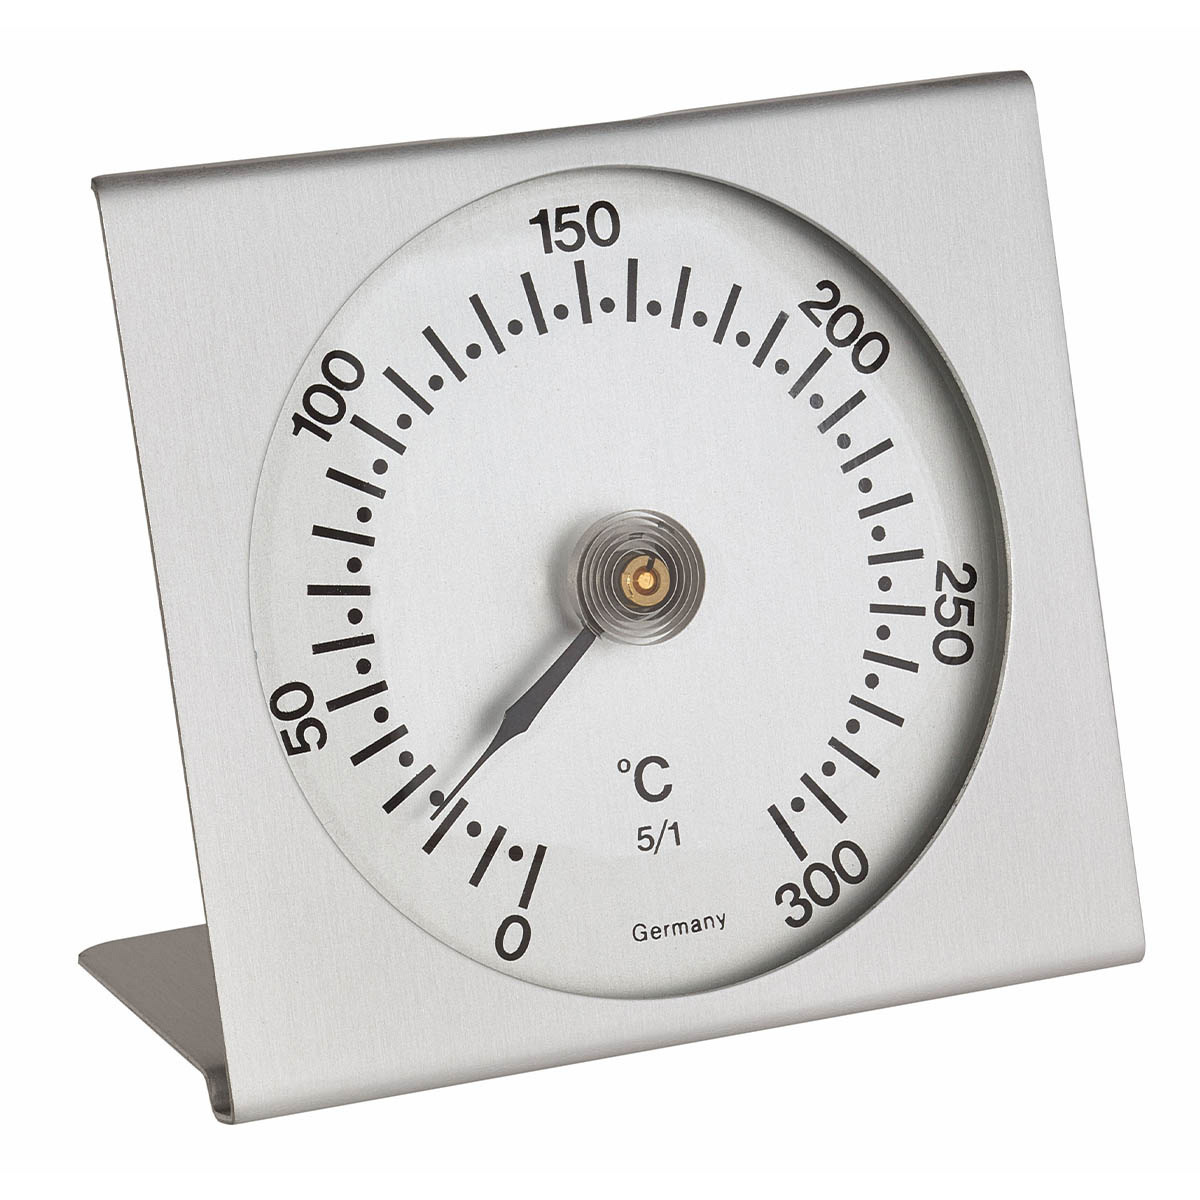 Analoges Backofenthermometer aus Metall